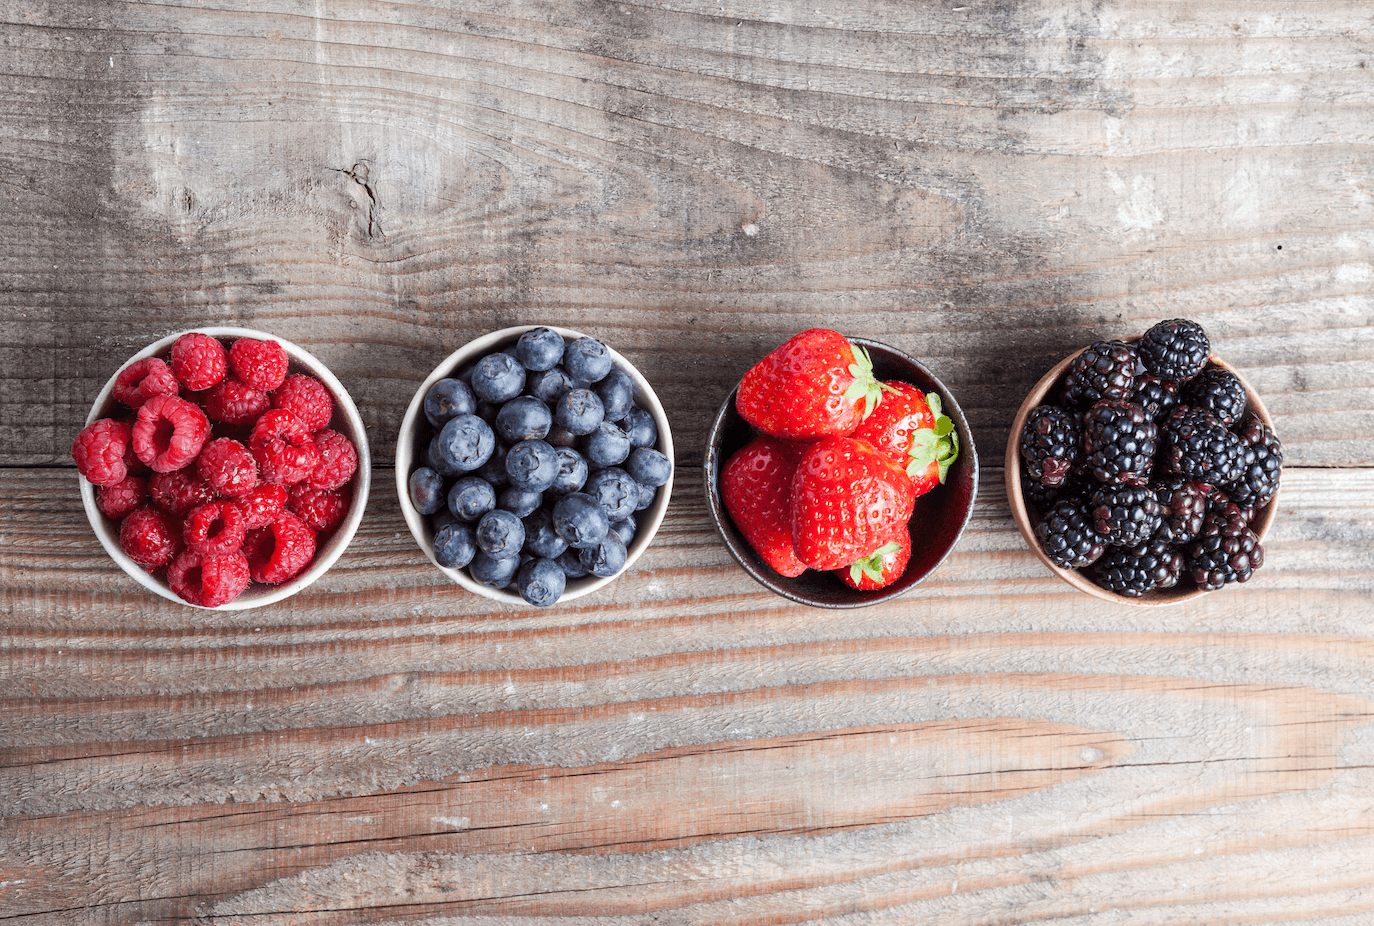 Berries and Cognitive Function